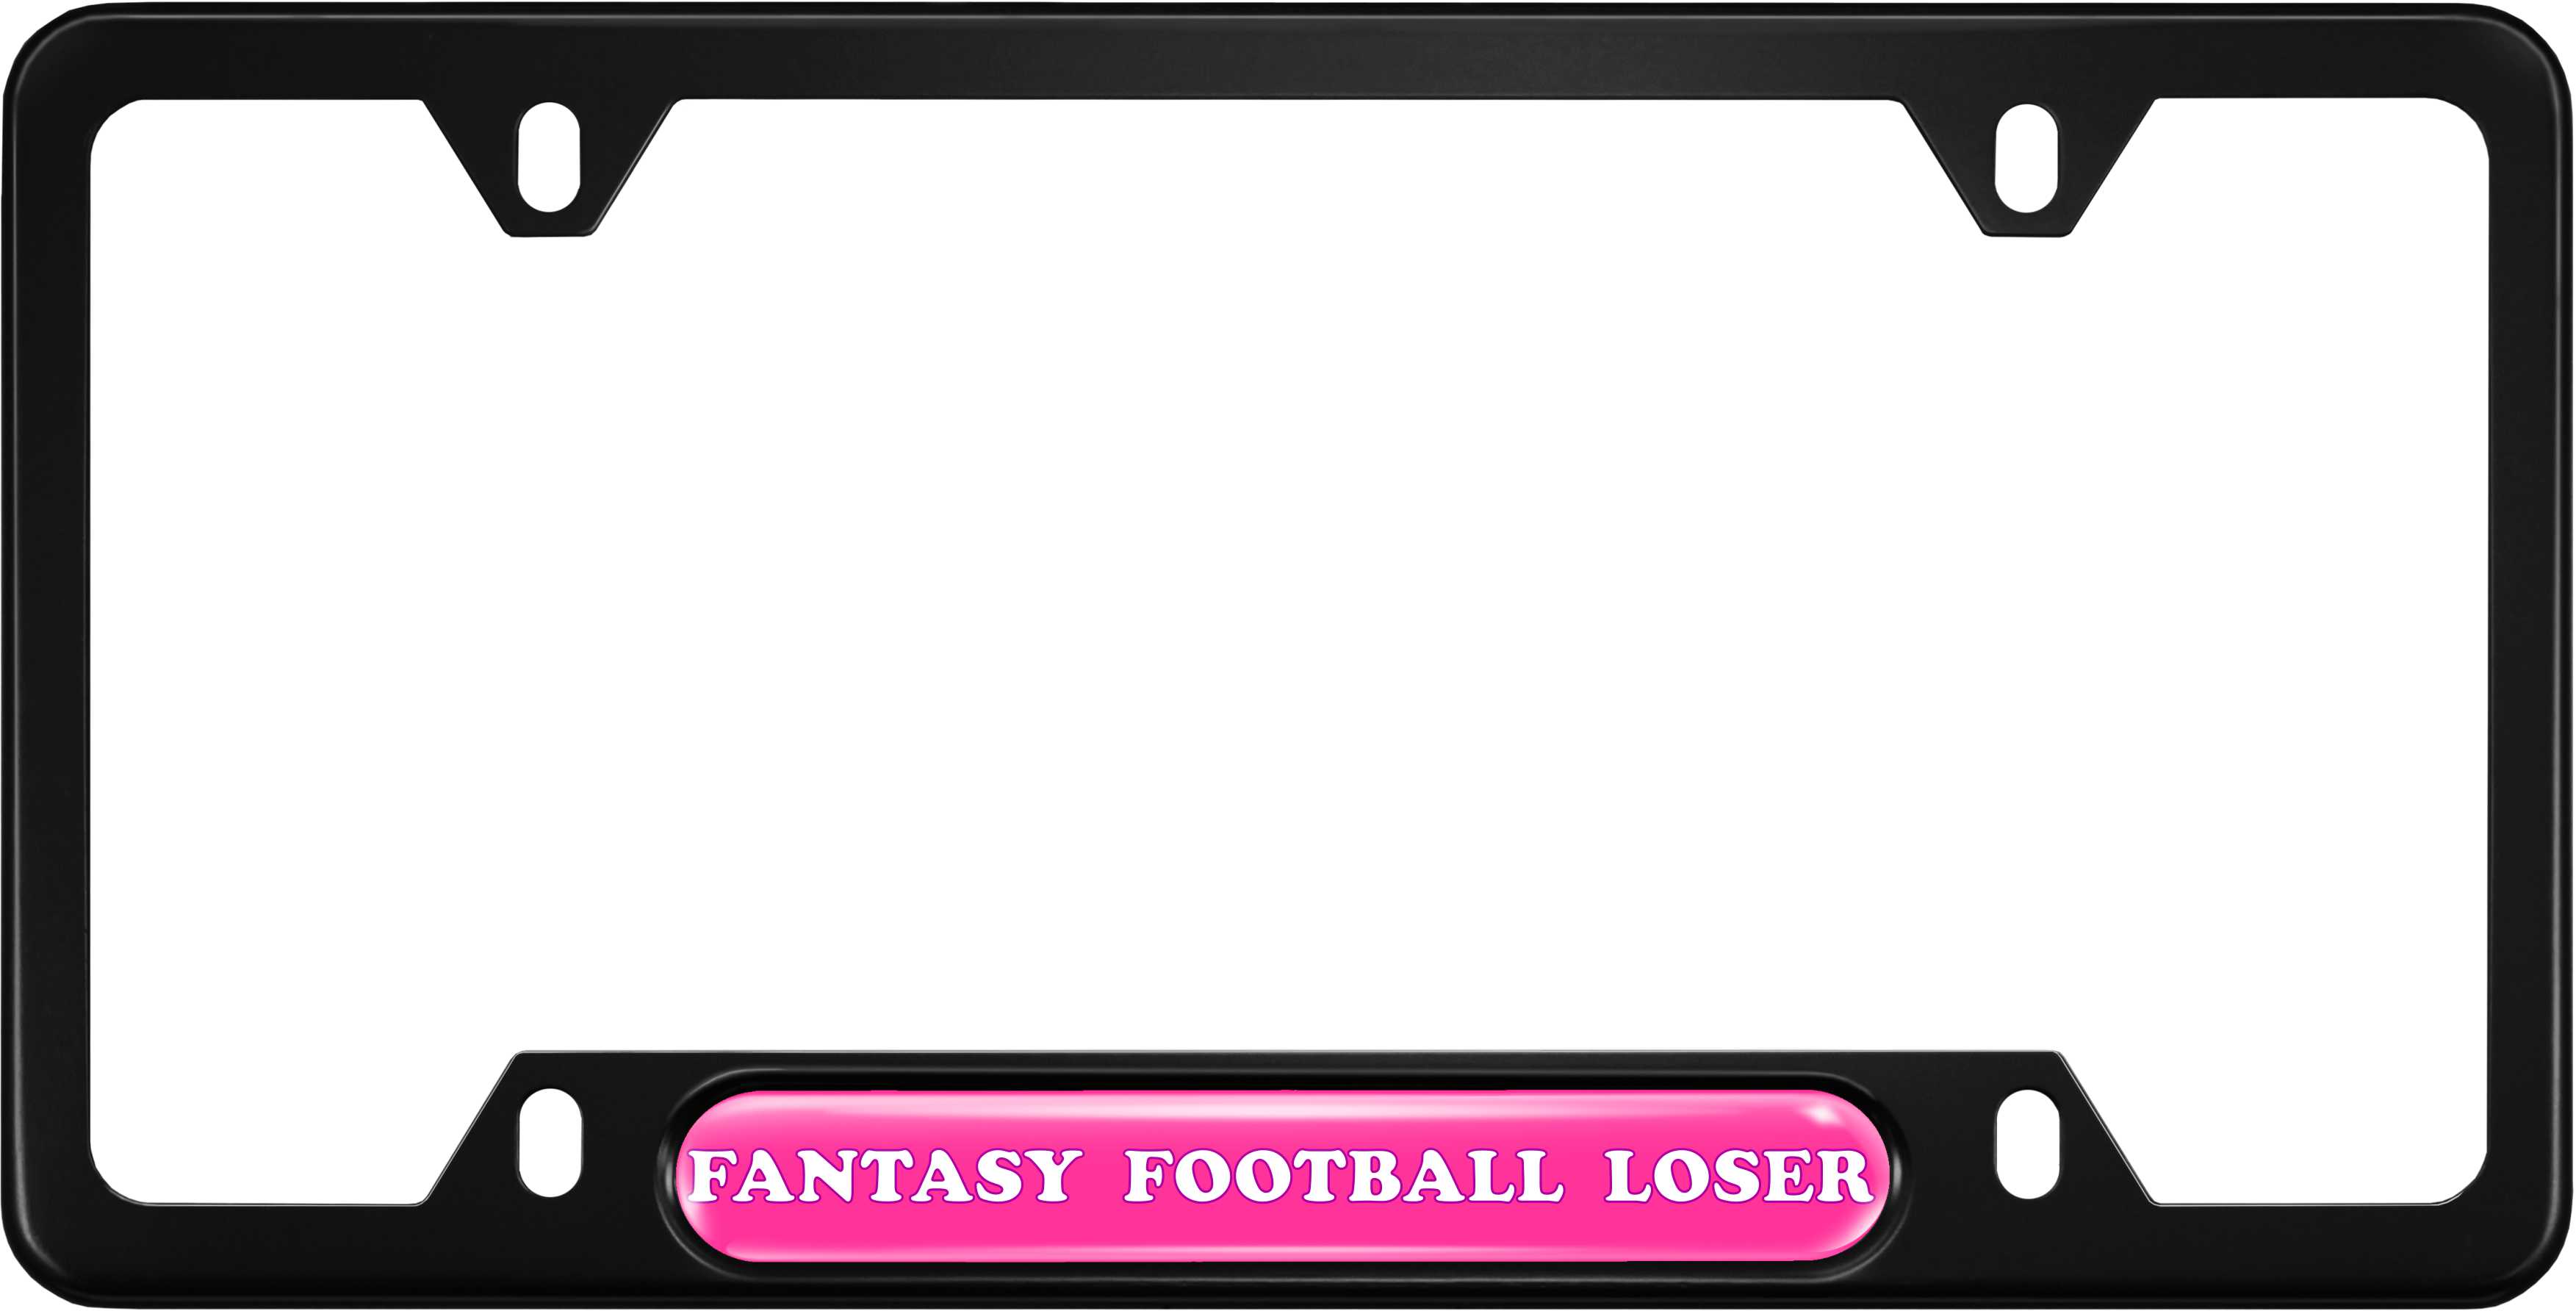 Fantasy Football Loser - Anodized Aluminum License Plate Frame with Clear Dome - Black